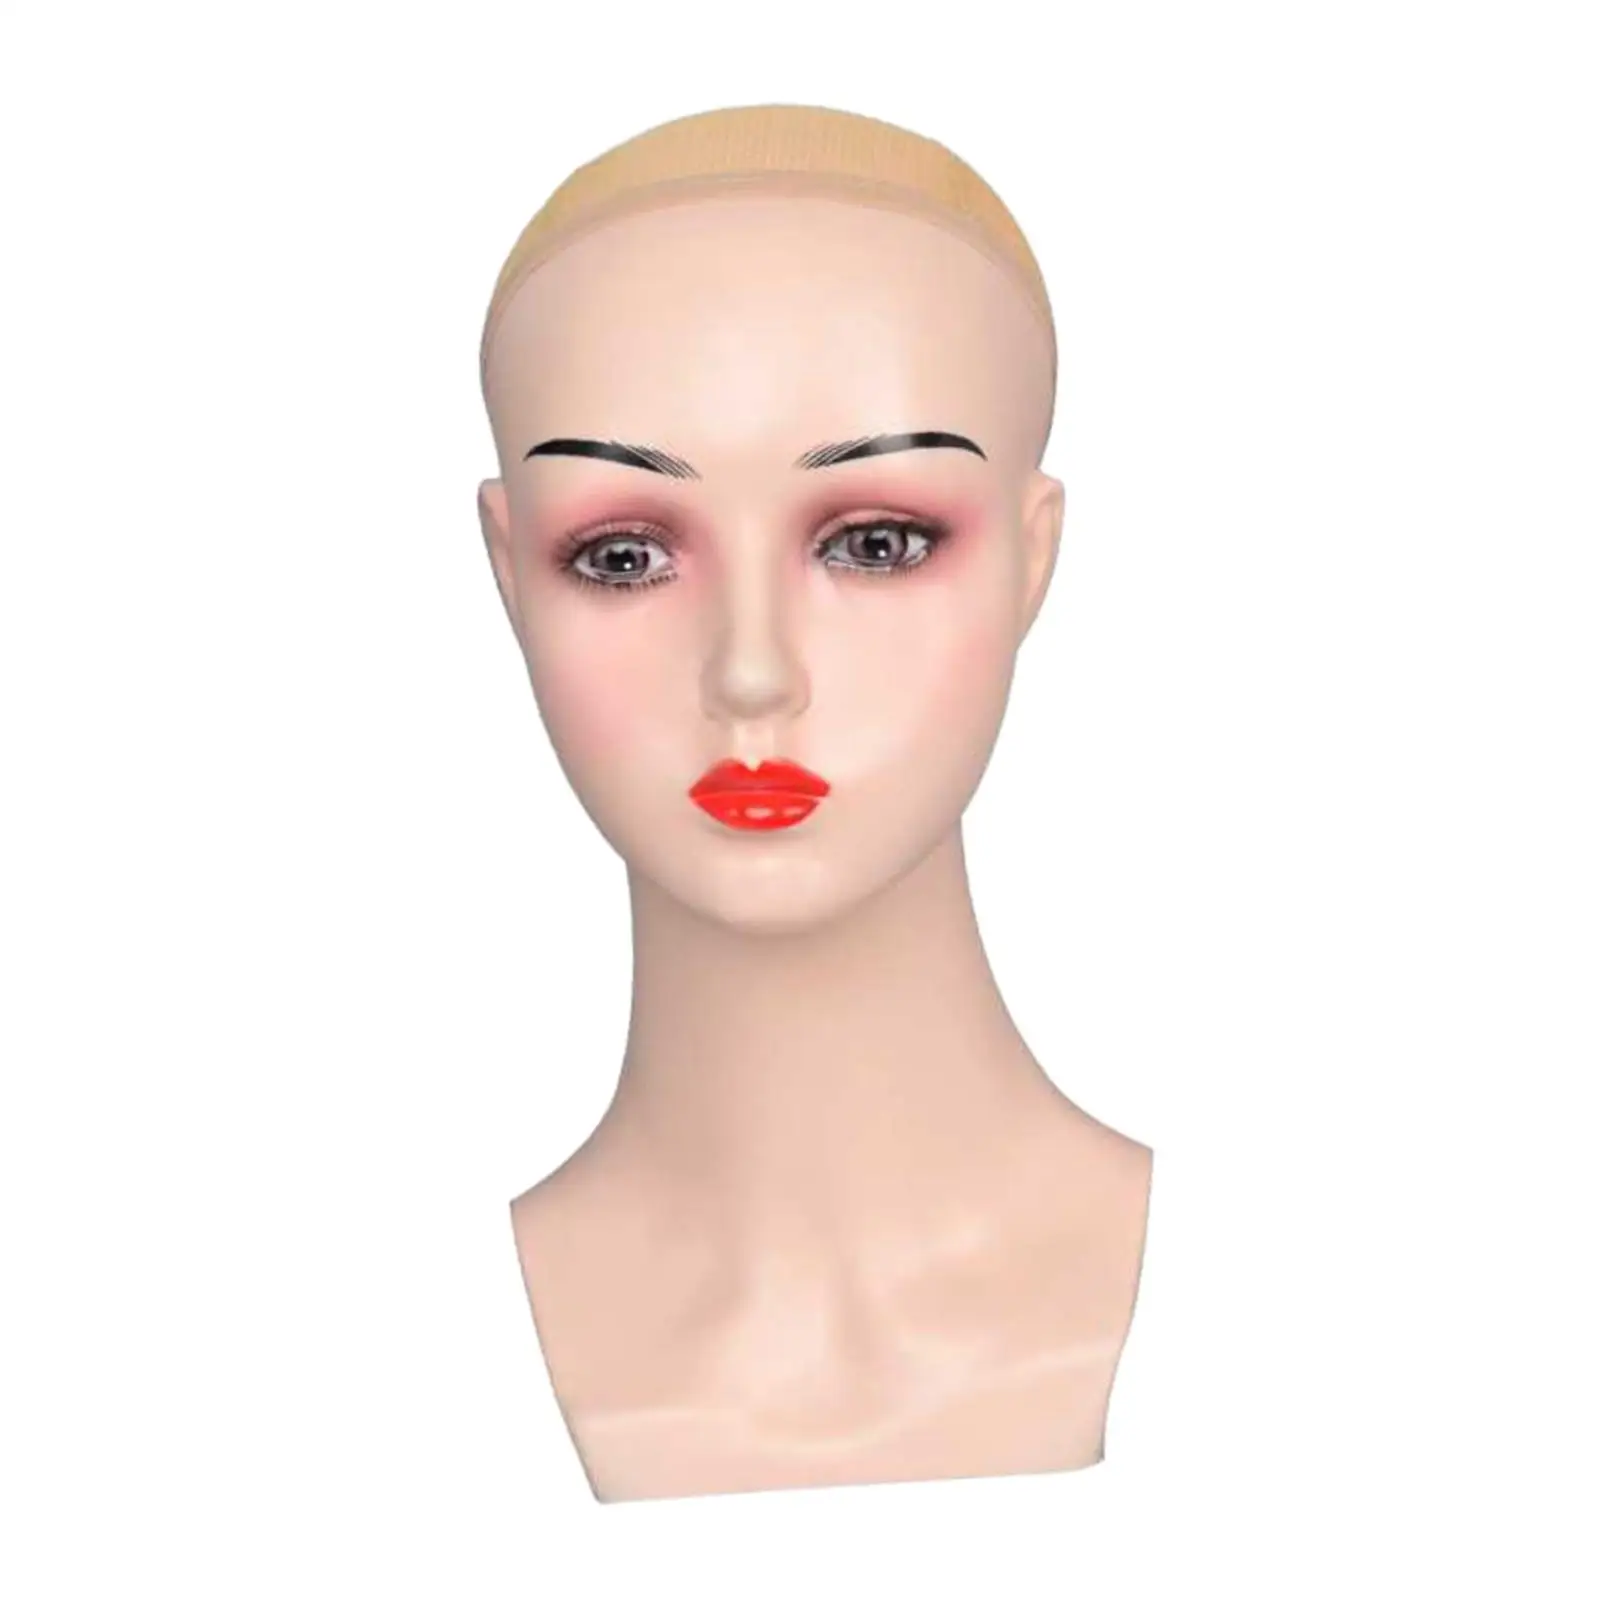 Female Bald Mannequin Head Hat Display Rack Stable Base Smooth Durable Manikin for Hats Wigs Making Hairpieces Necklace Jewelry